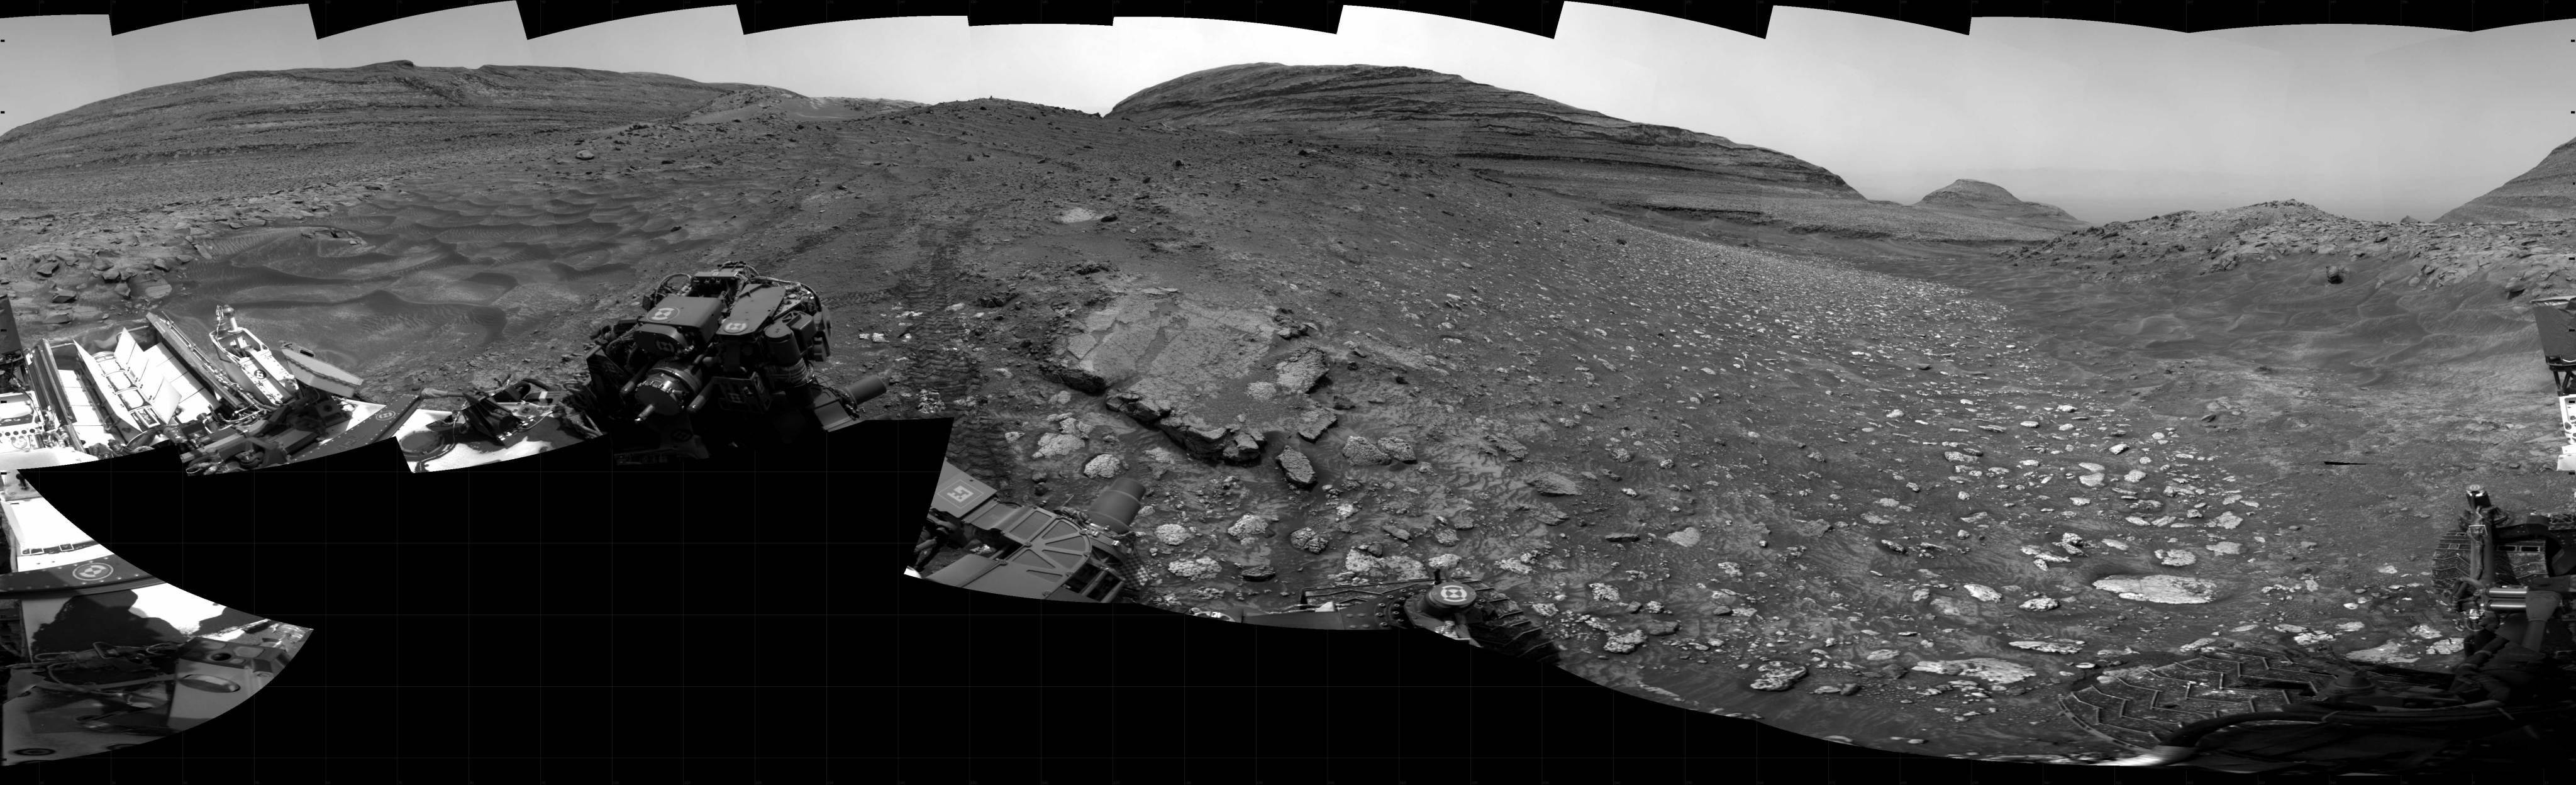 Curiosity took the images on May 31, 2024, Sol 4200 of the Mars Science Laboratory mission at drive 2484, site number 107. The local mean solar time for the image exposures was from 1 PM to 12 PM.